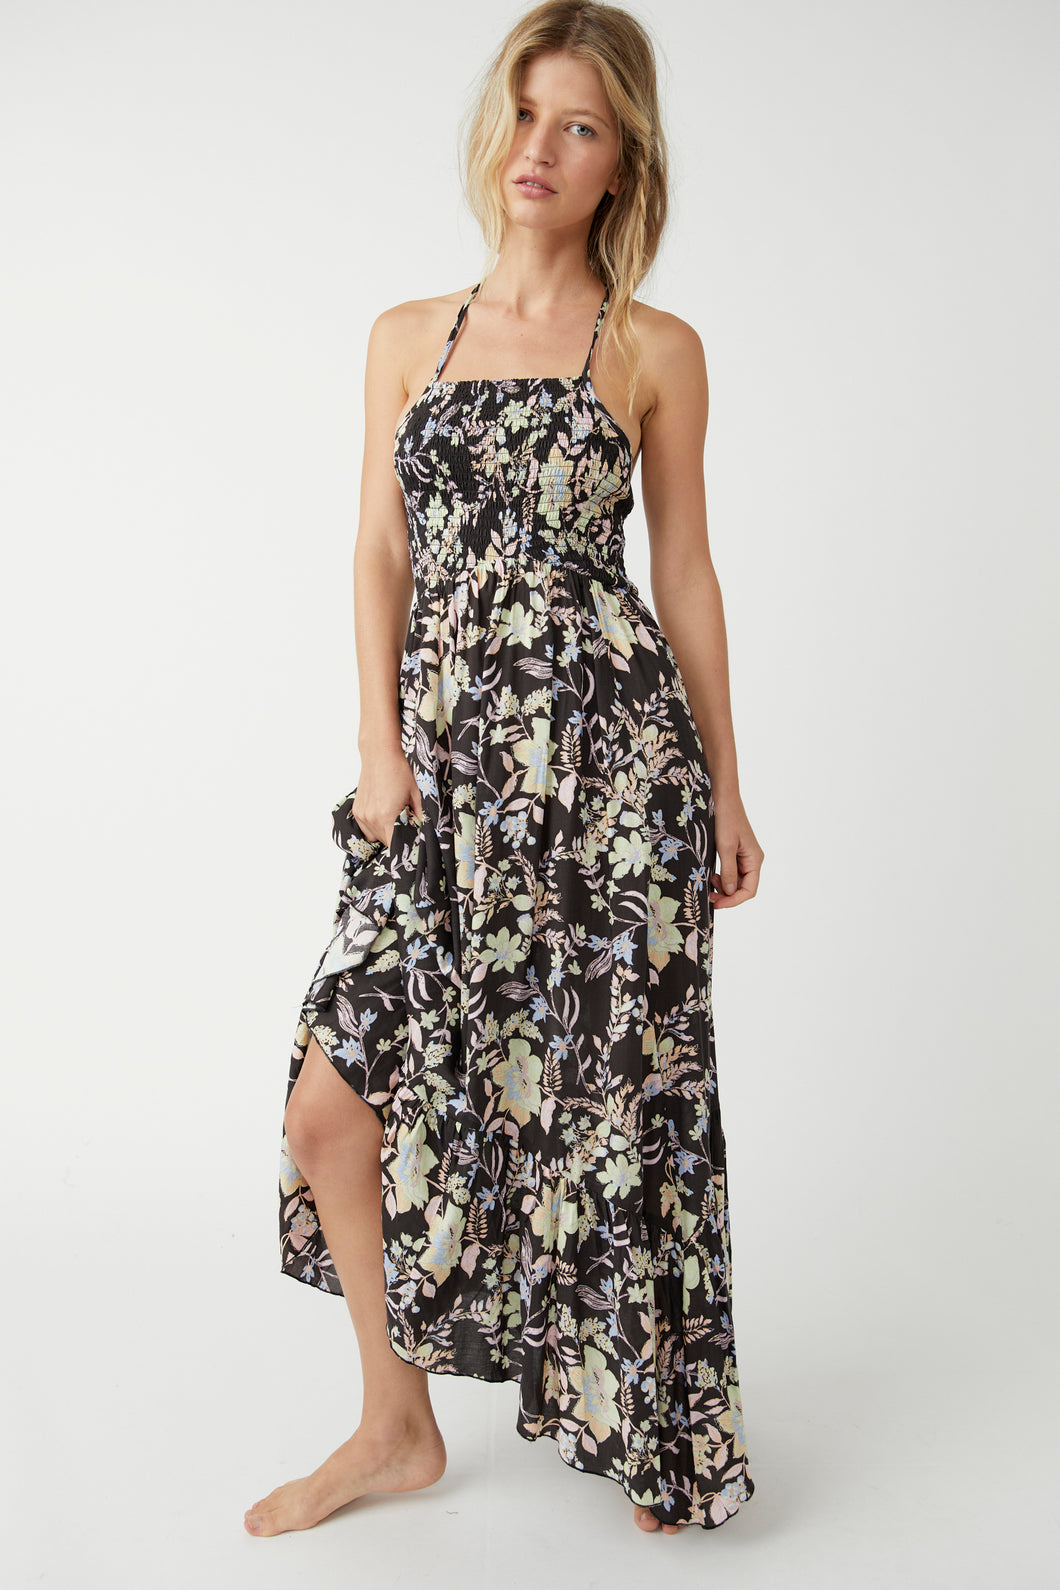 Free People Heat Wave Printed Maxi in Midnight